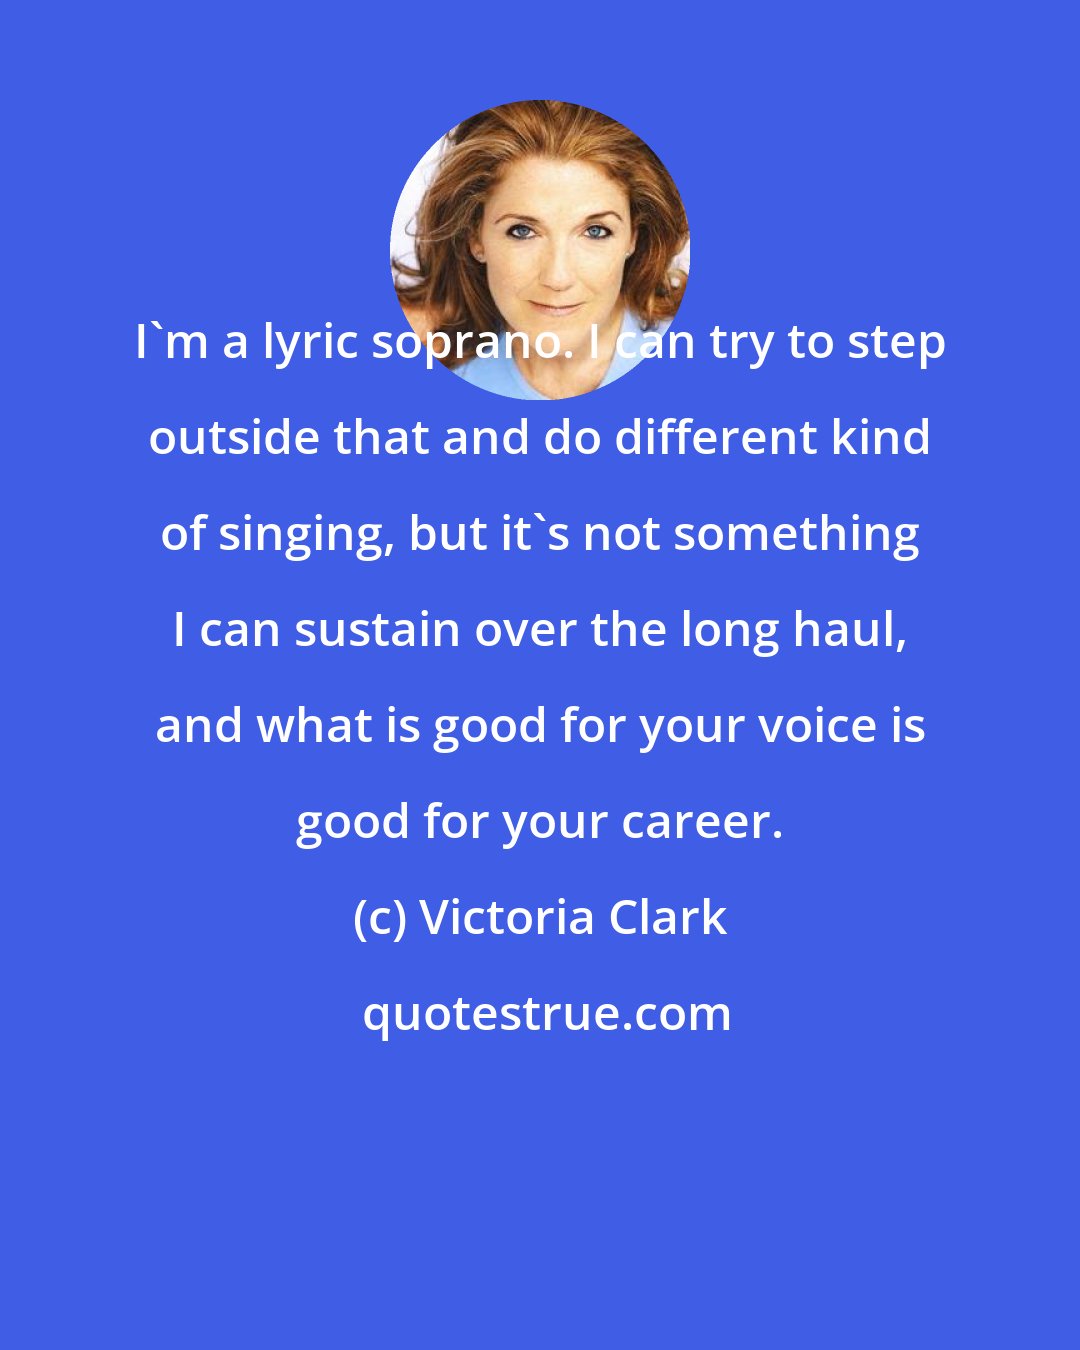 Victoria Clark: I'm a lyric soprano. I can try to step outside that and do different kind of singing, but it's not something I can sustain over the long haul, and what is good for your voice is good for your career.